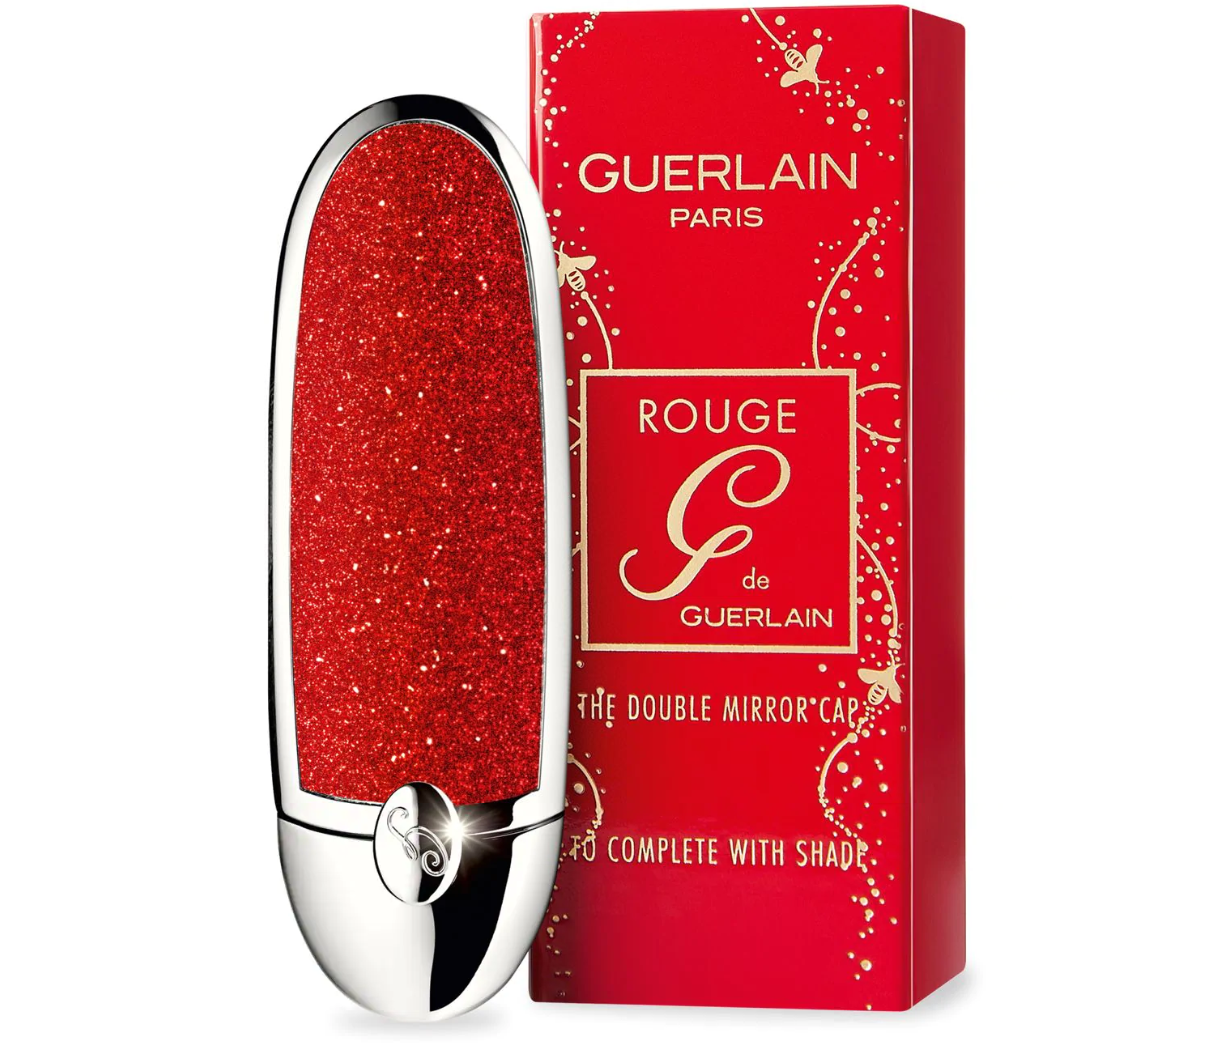 GUERLAIN LUNAR NEW YEAR COLLECTION FOR 2020 3 - GUERLAIN LUNAR NEW YEAR COLLECTION FOR 2020